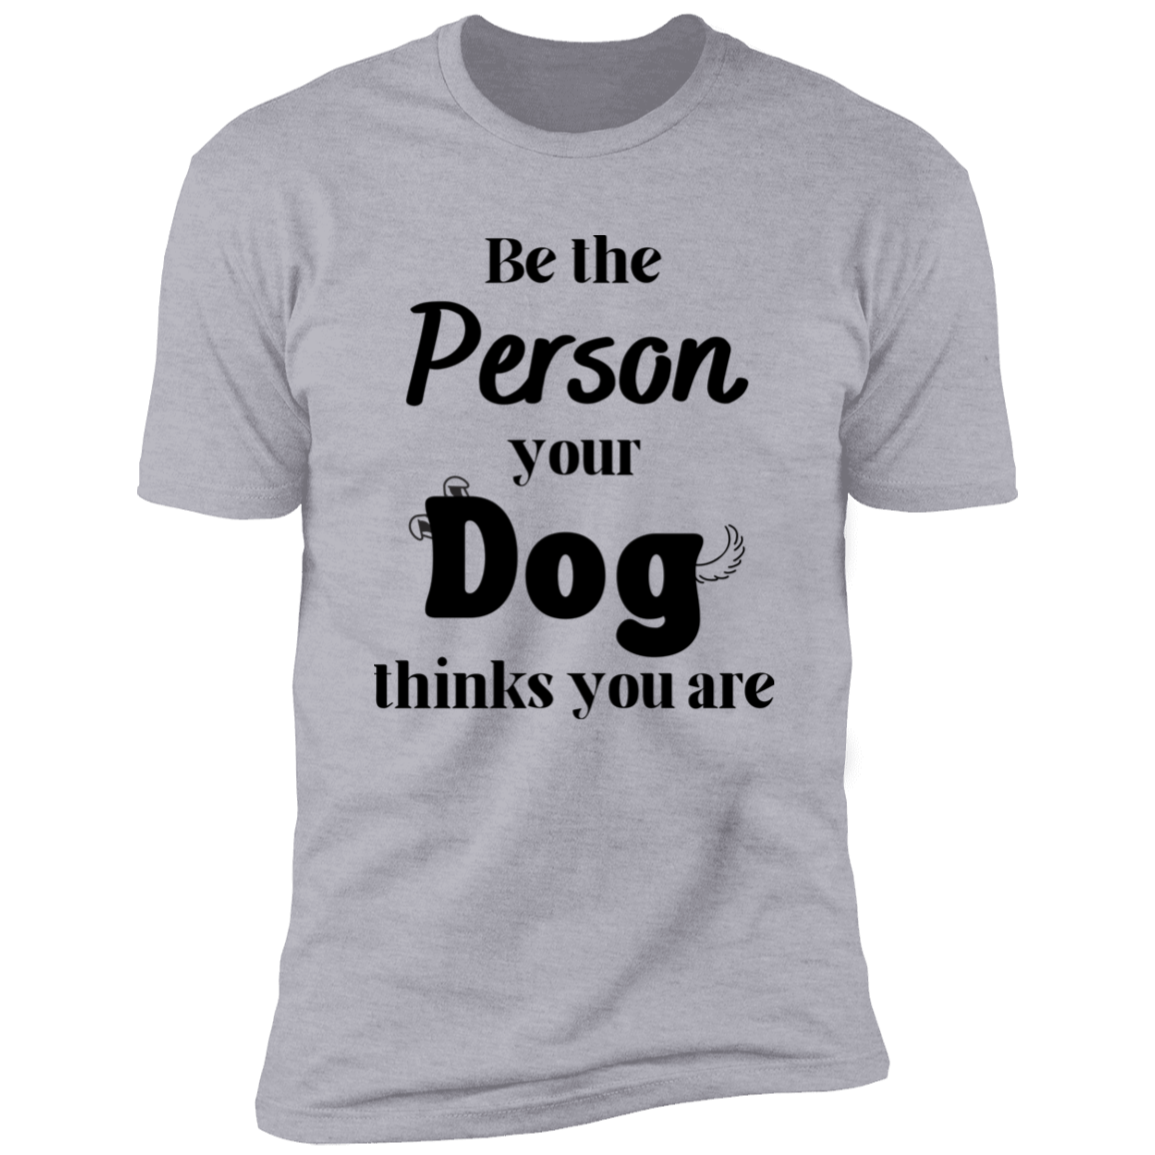 Be the Person Your Dog Thinks You Are T-shirt, Dog Shirt for humans, in light heather gray